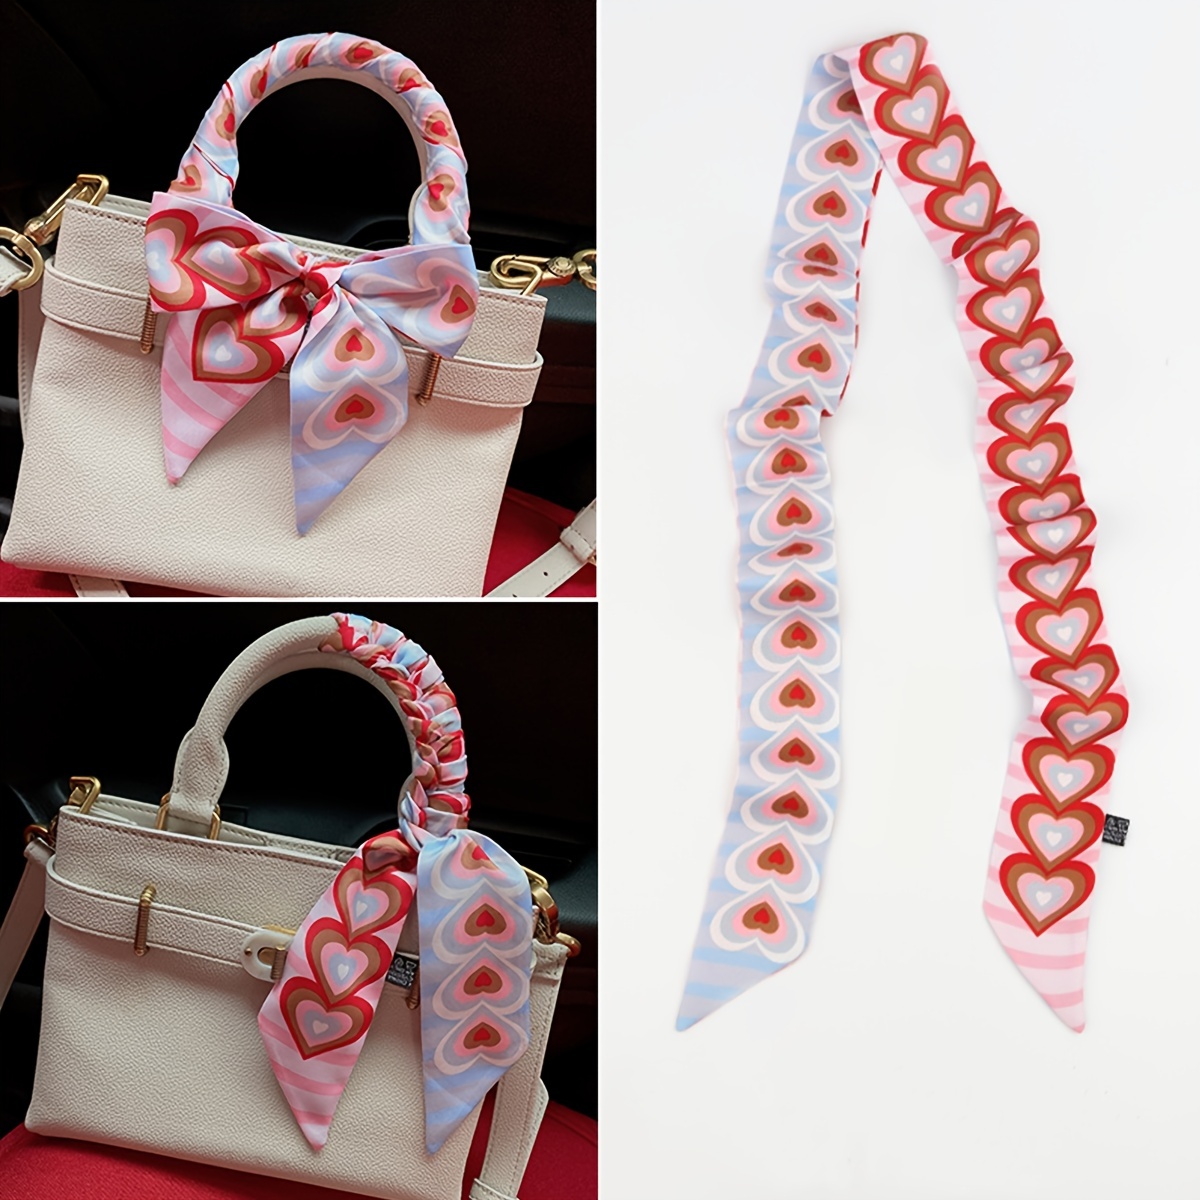 How To Tie Twilly Scarf on Bag Handle